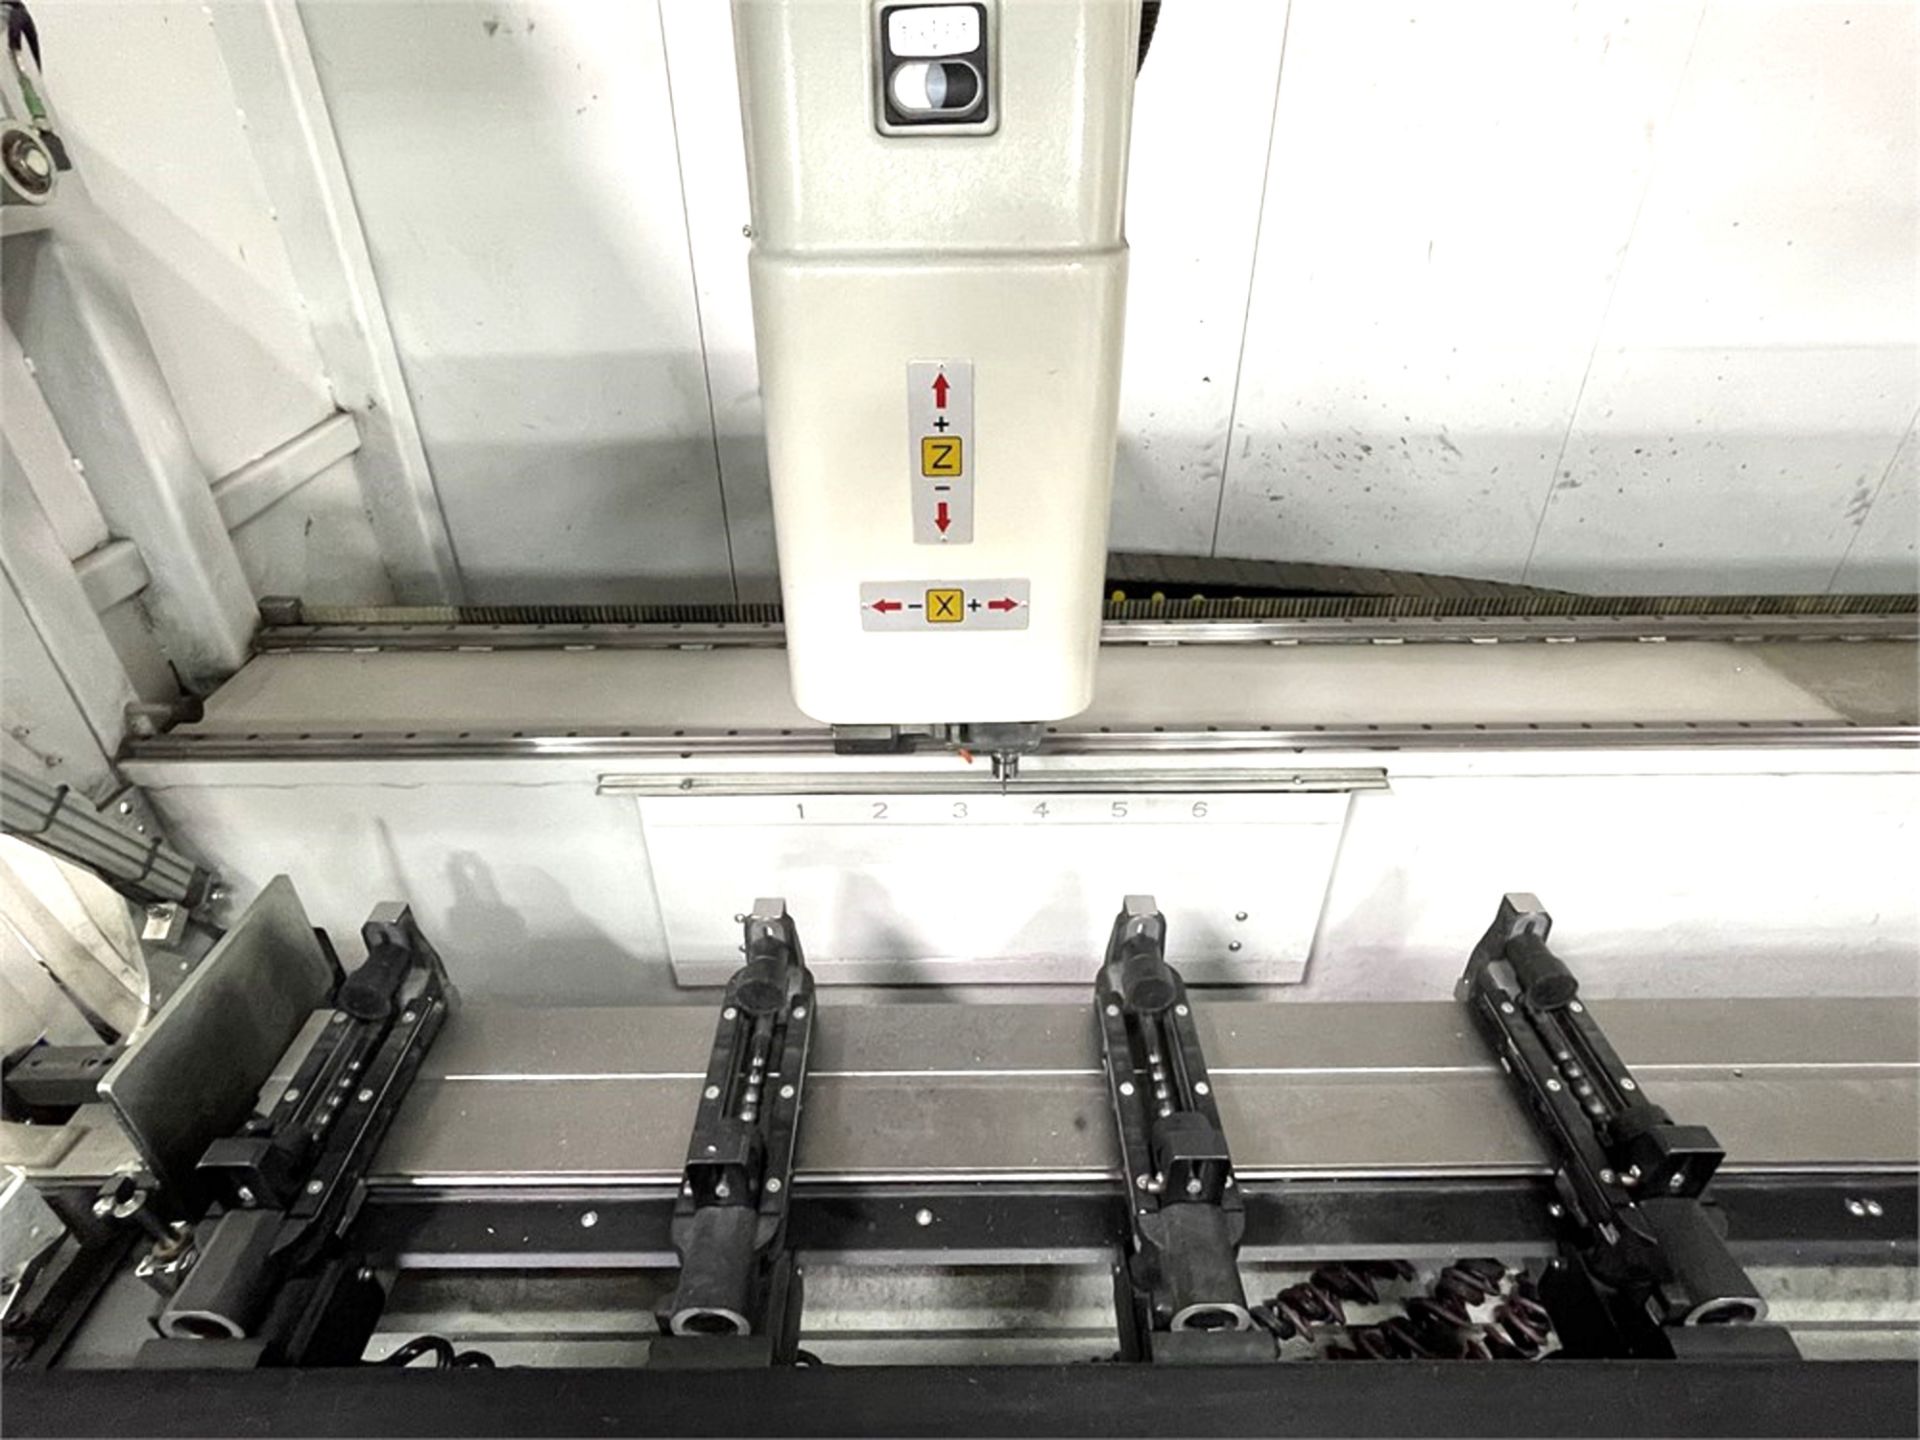 10' FOM INDUSTRIE MODEL MODUS CNC 4-AXIS ALUMINUM PROFILE MACHINING CENTER/ROUTER, S/N A0700194 - Image 7 of 14